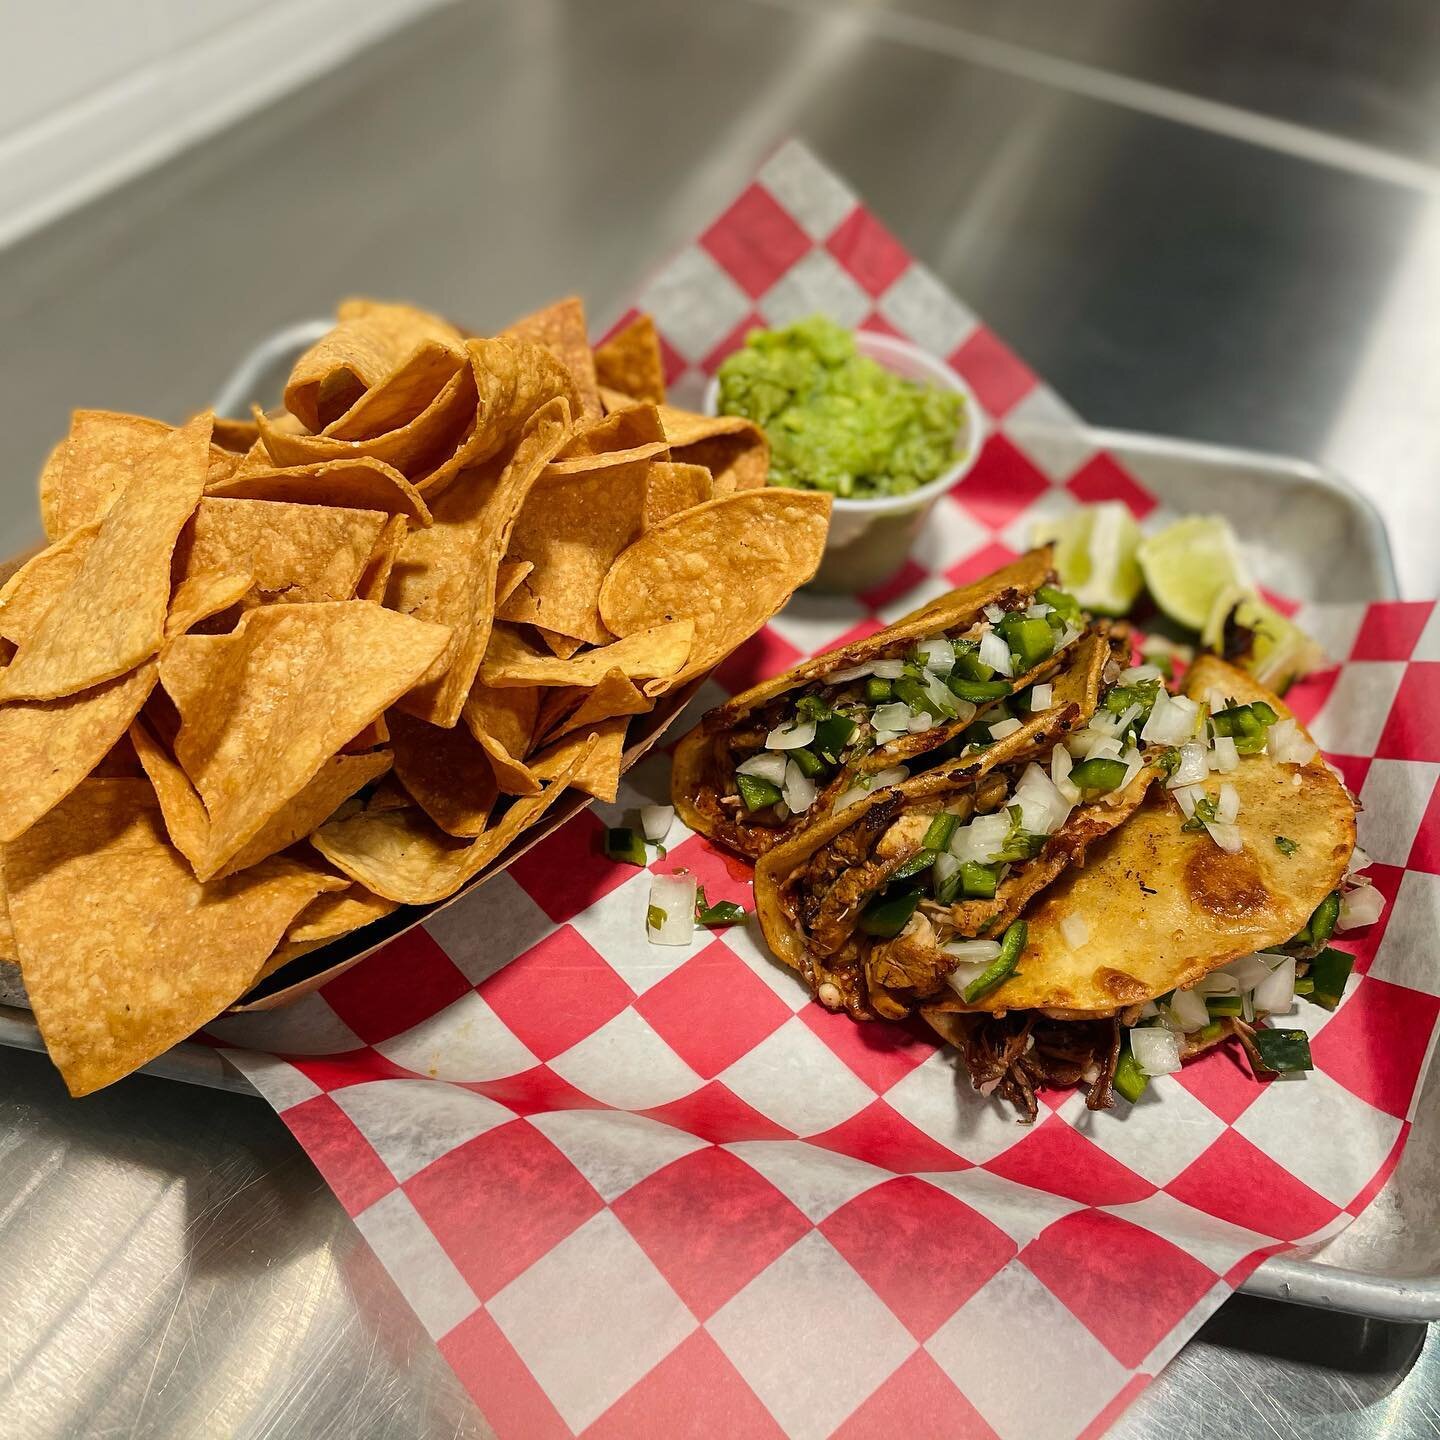 TACO PLATITO GORDITO 🌮🍽
It&rsquo;s not just fun to say. It&rsquo;s also delicious!

Three juicy tacos and your choice of side. Build the combo of your taco dreams 💭🙌🏽
&nbsp; ⠀⠀⠀⠀⠀⠀⠀⠀⠀⠀⠀⠀
#eatlocal #fisherstestkitchen #indyeats #visitindy #lovein